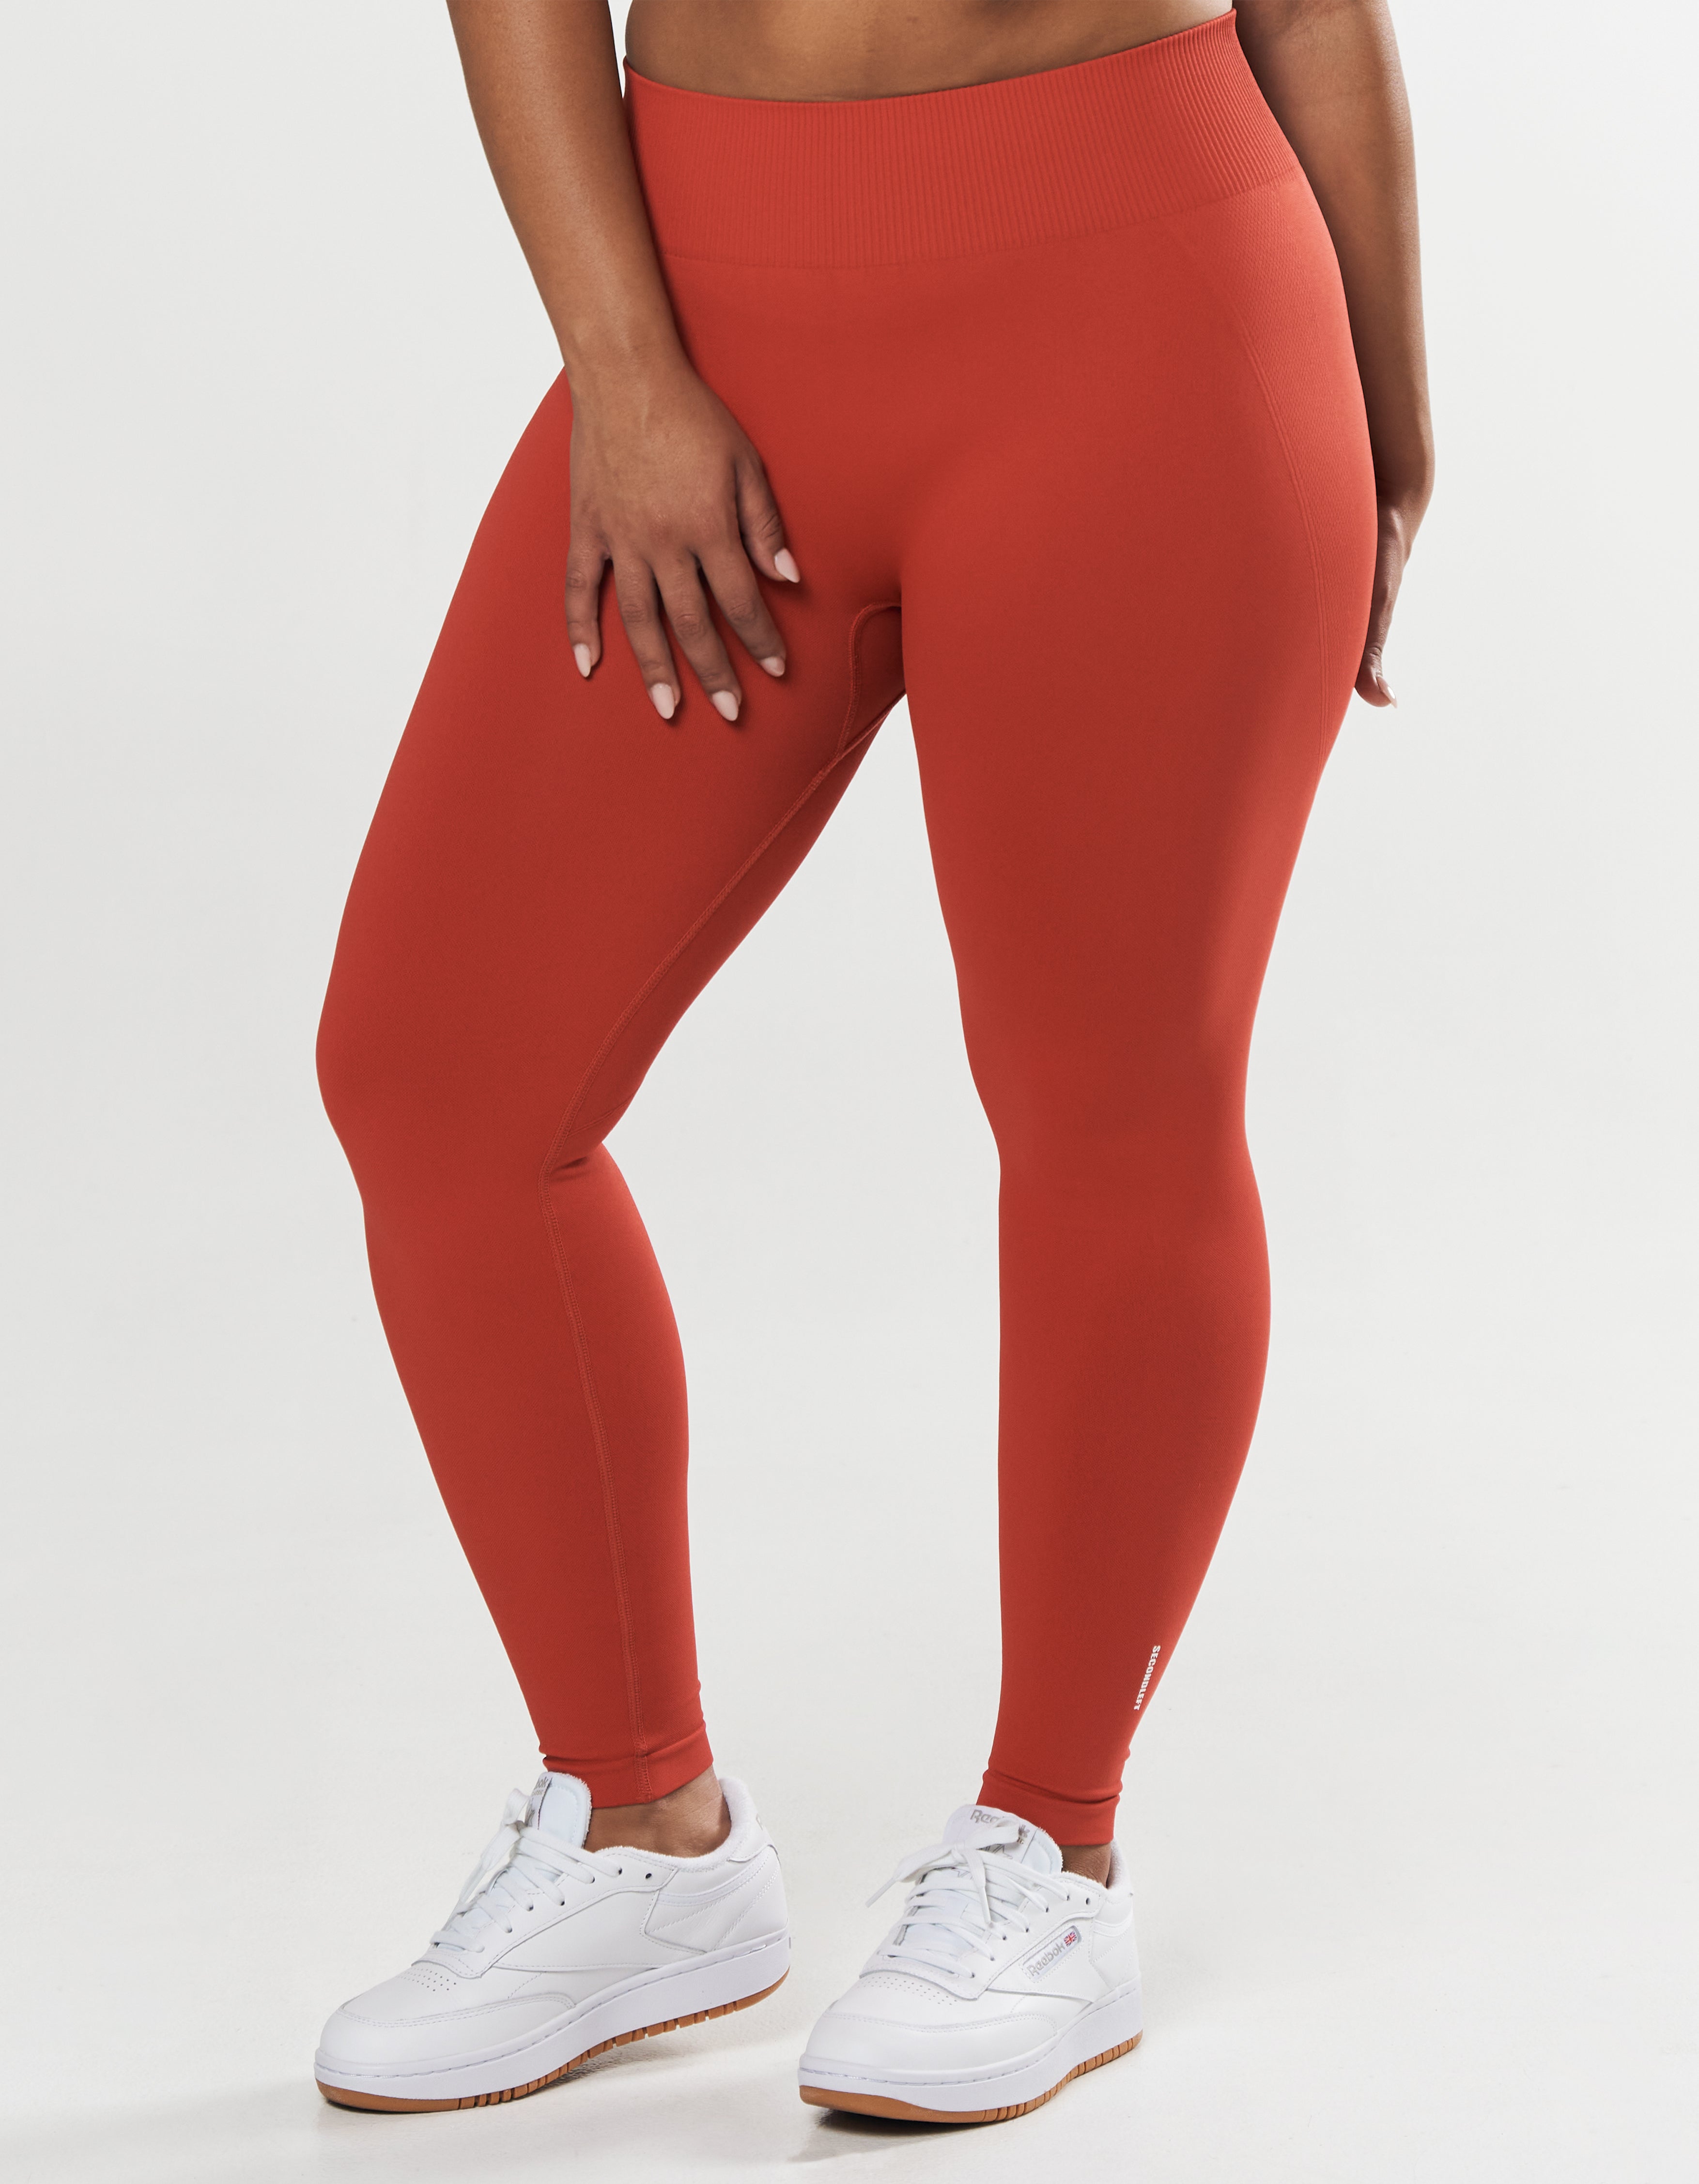 sl-seamless-full-length-tights-red